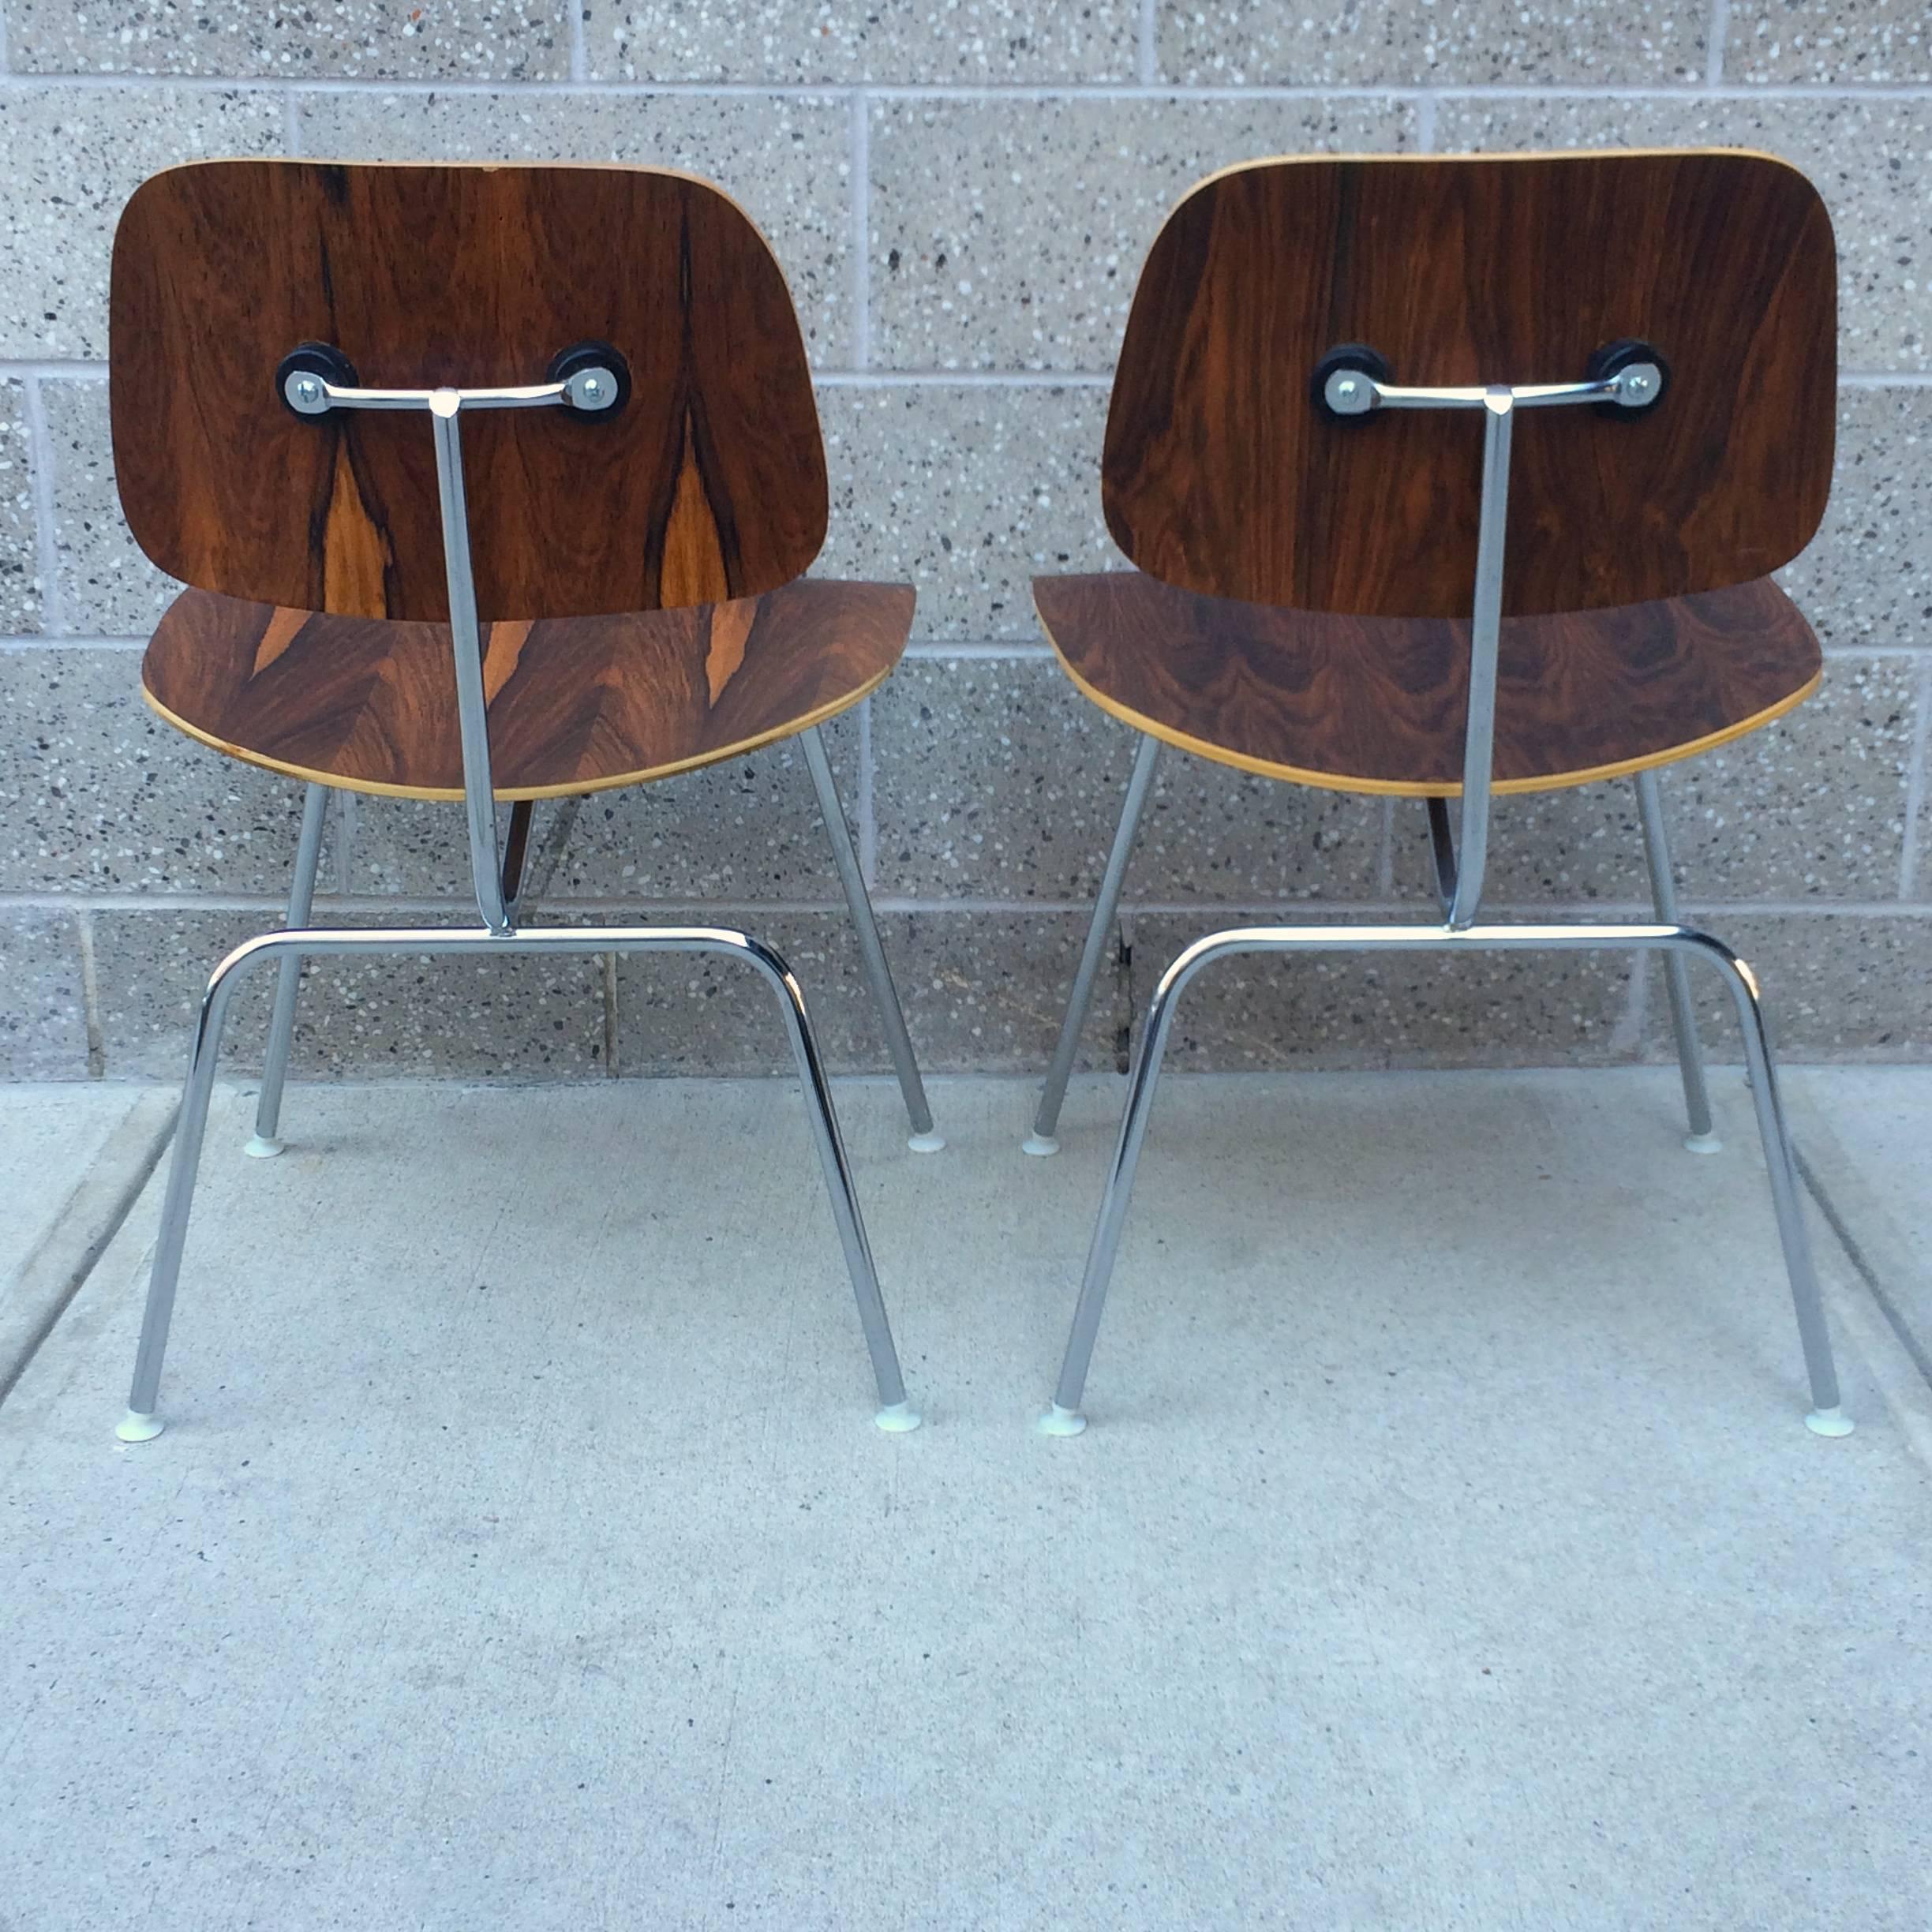 Late 20th Century Pair of Eames Rosewood DCM Chairs for Herman Miller